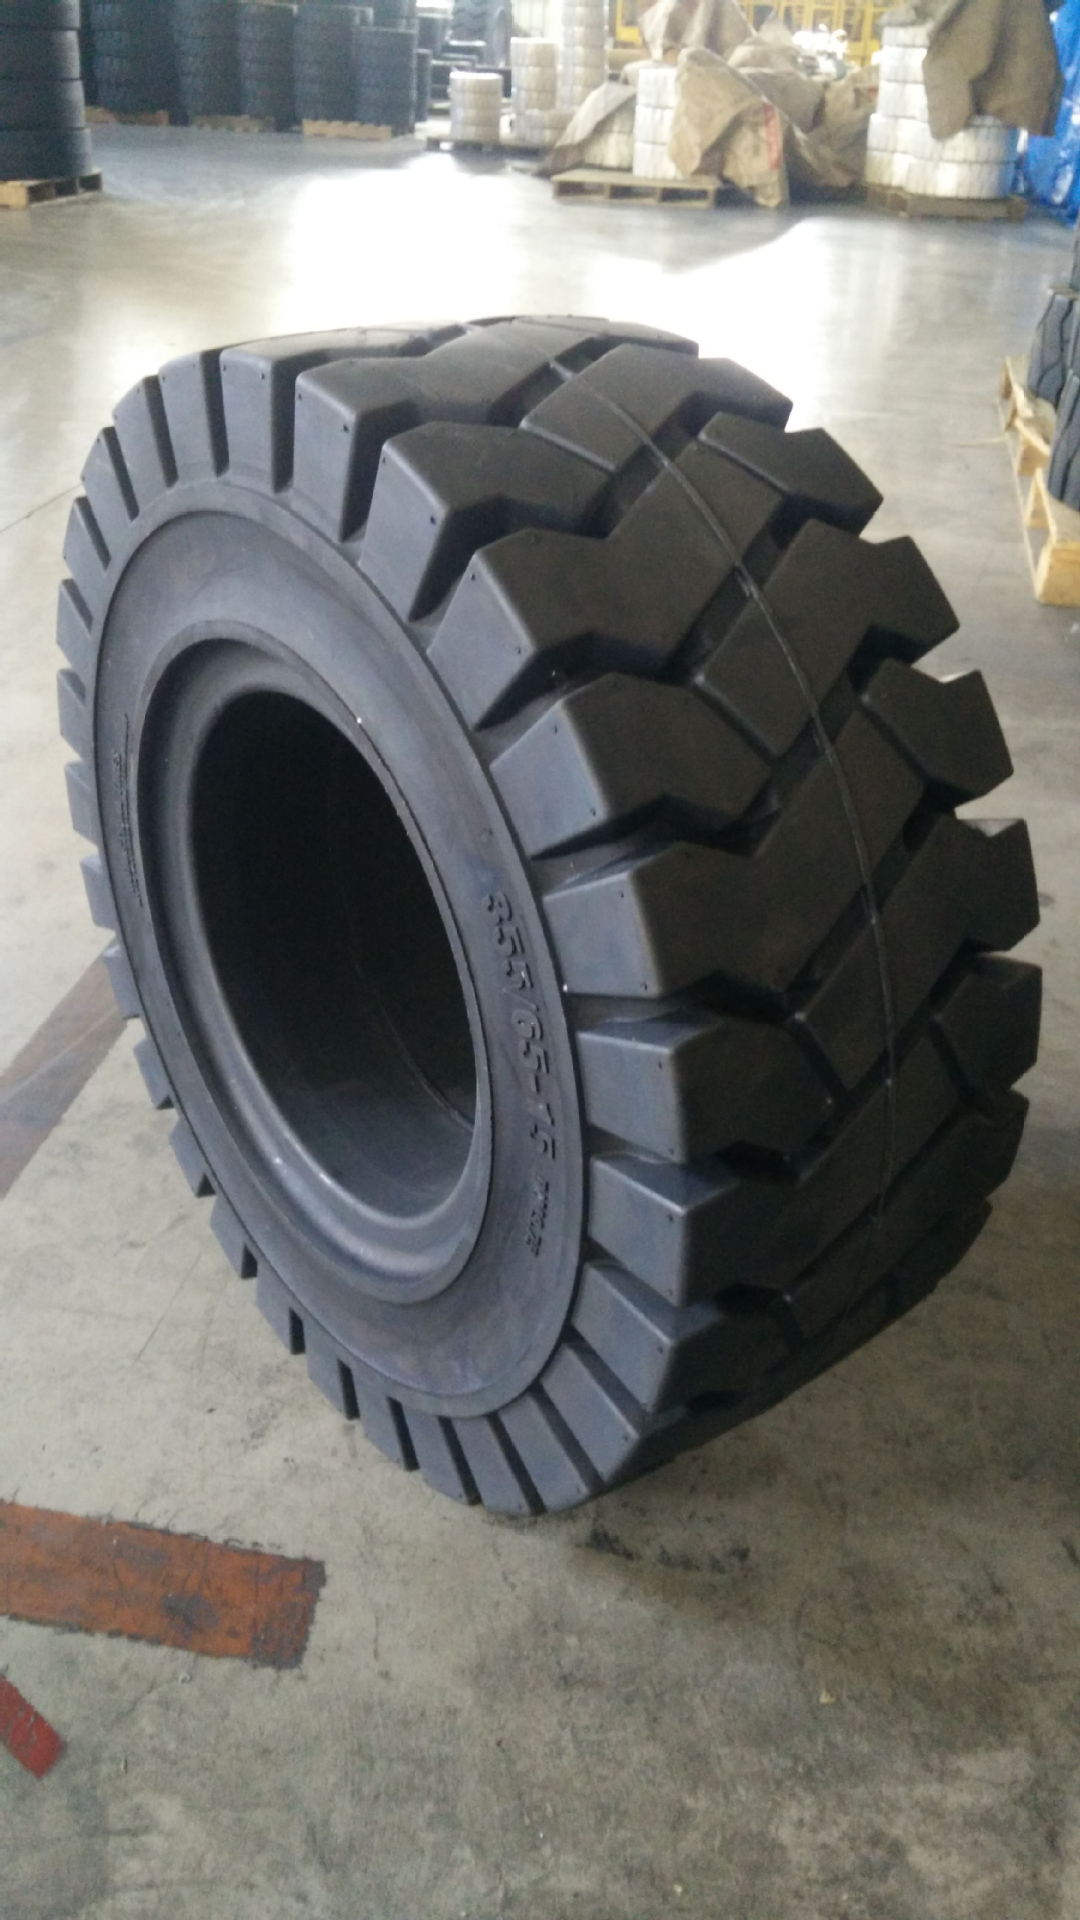 355/65-15 tubeless tire for sale